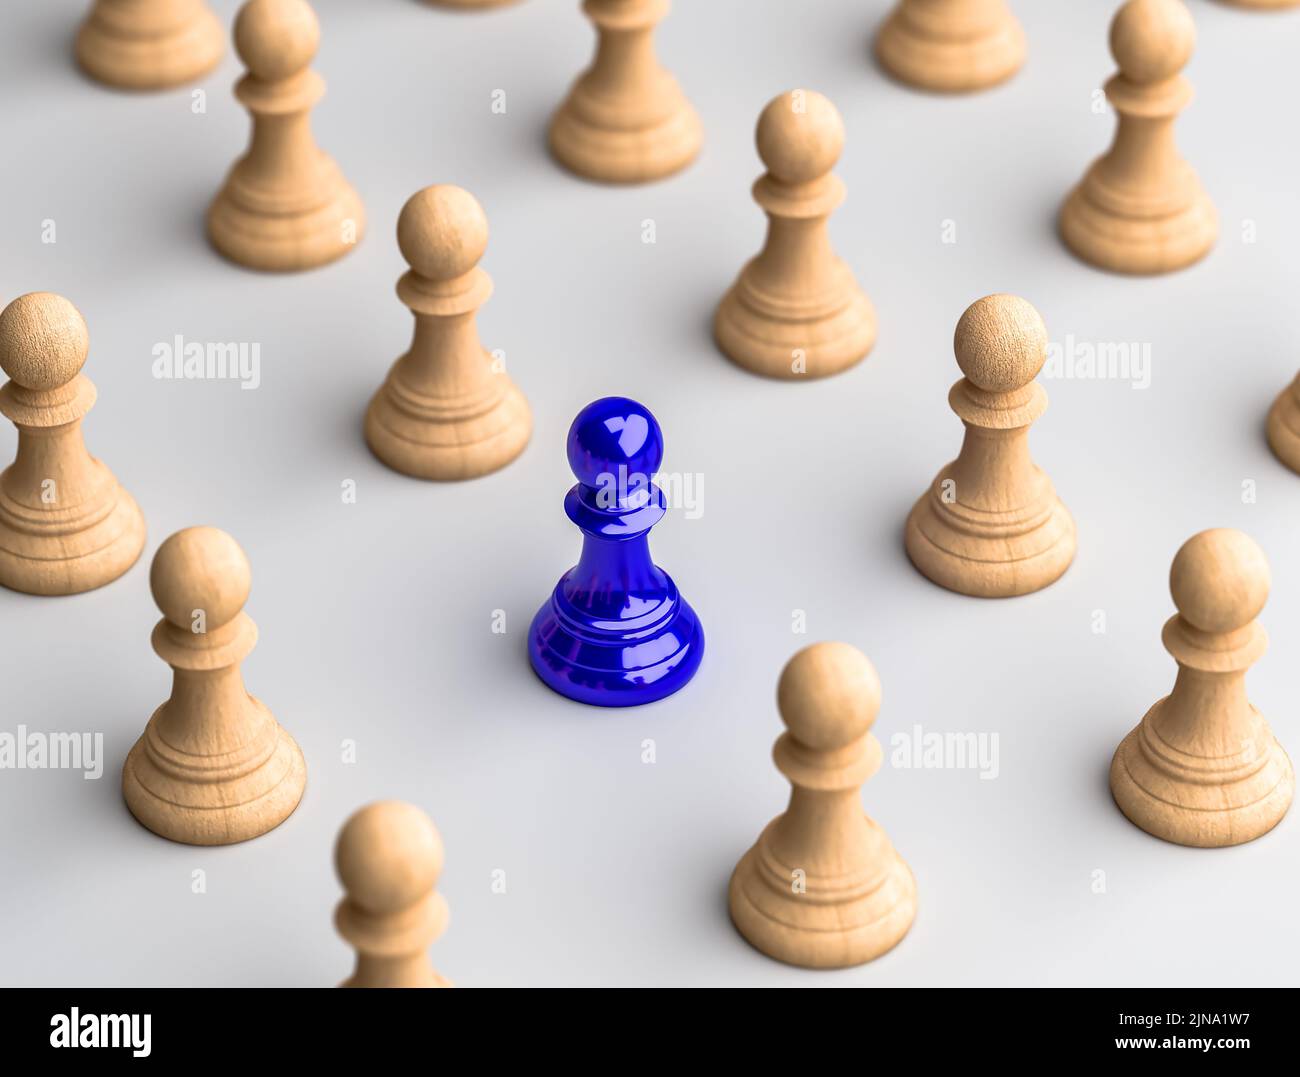 An blue chess pawn standing in the middle wooden chess pawn, appearing different in the crowd will be the center of attention. 3d illustration Stock Photo